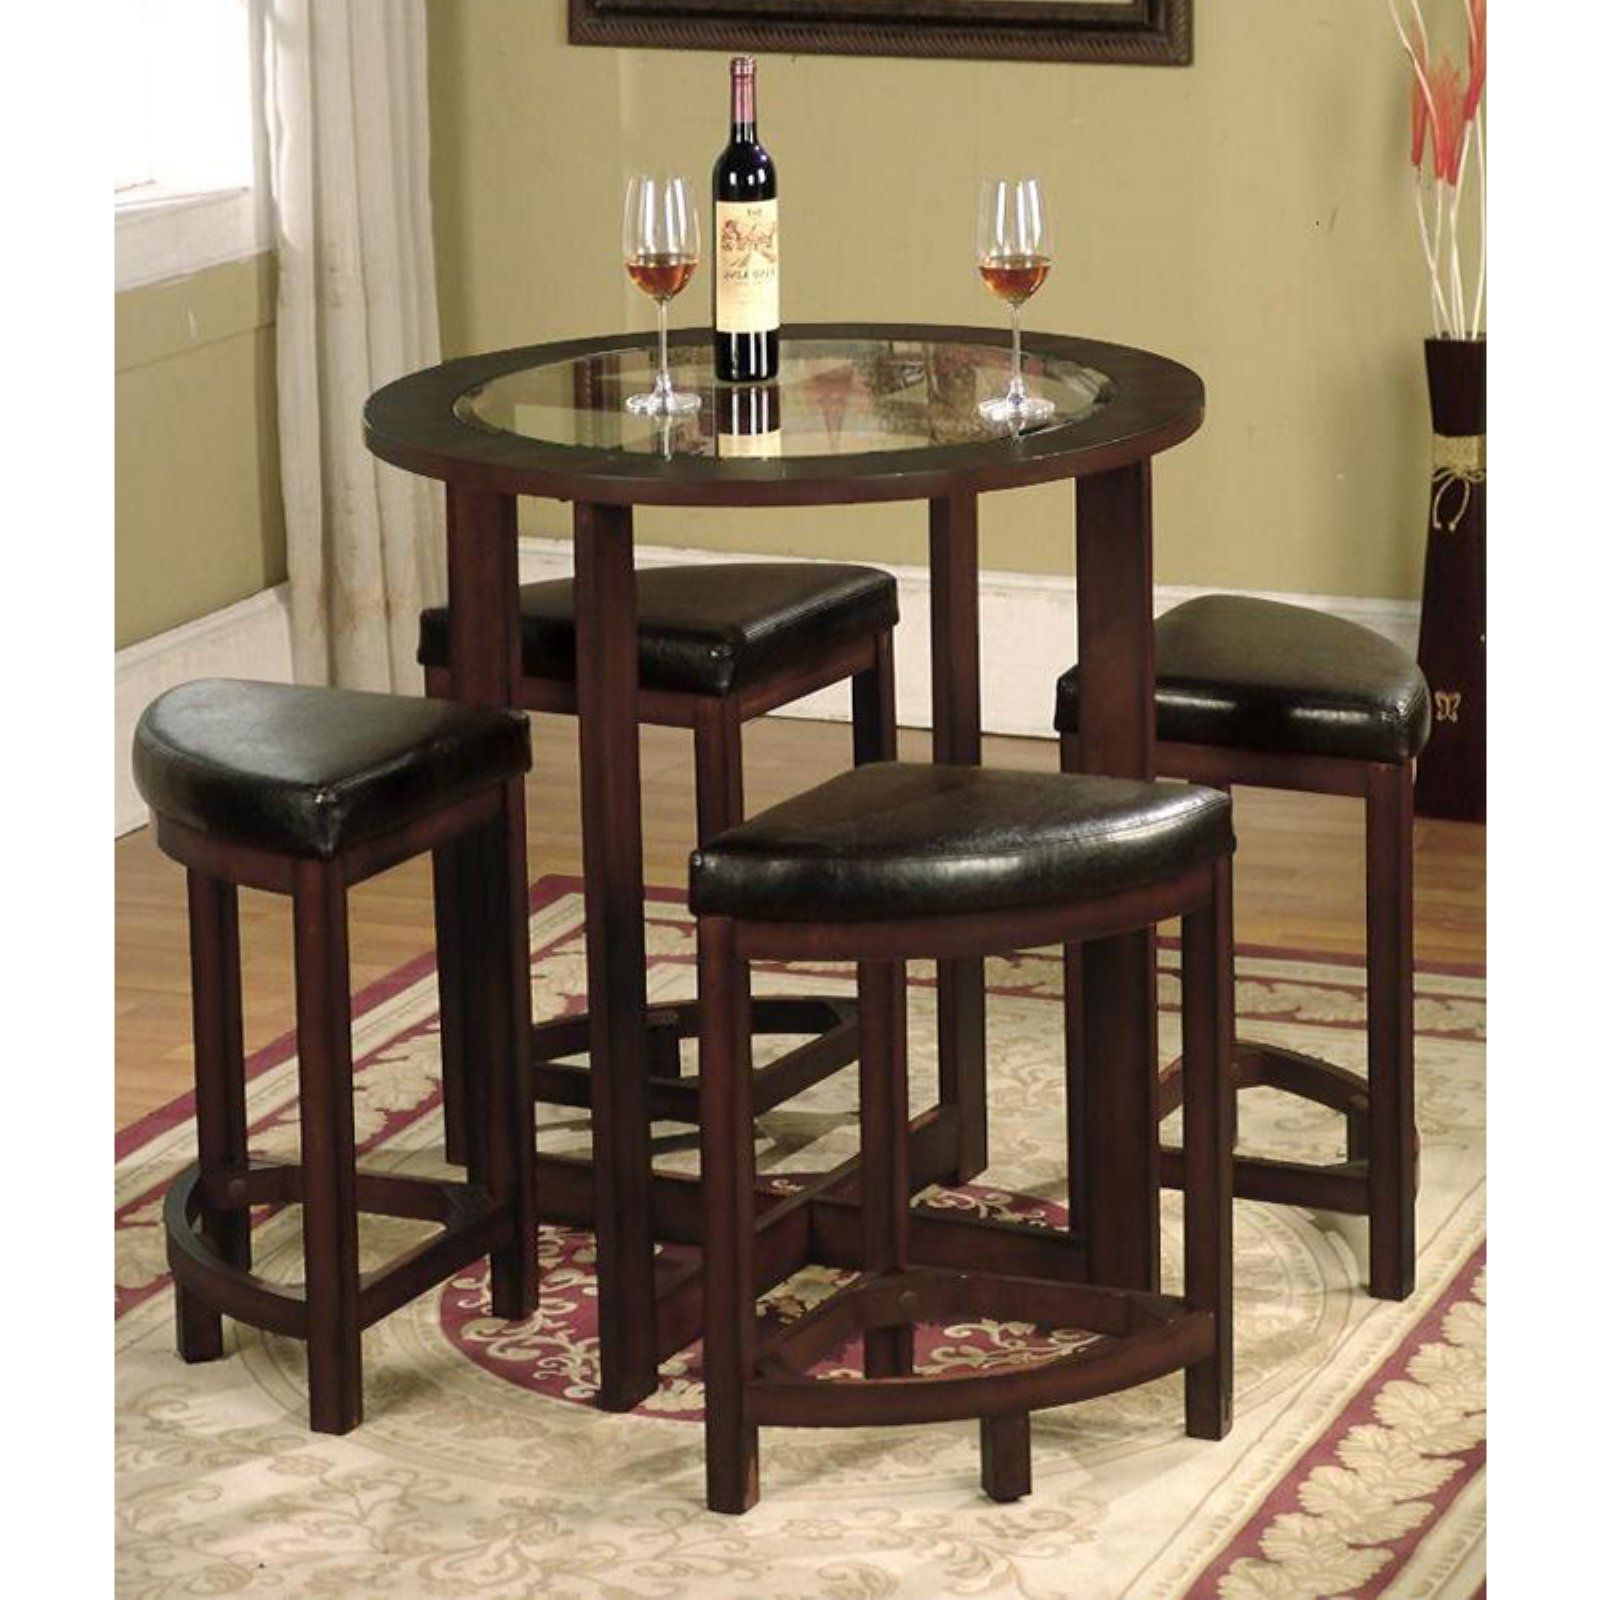 Wood Bistro Table And Chairs Sets With Regard To Most Current Roundhill Furniture Cylina Solid Wood Glass Top Round Counter Height (View 14 of 15)